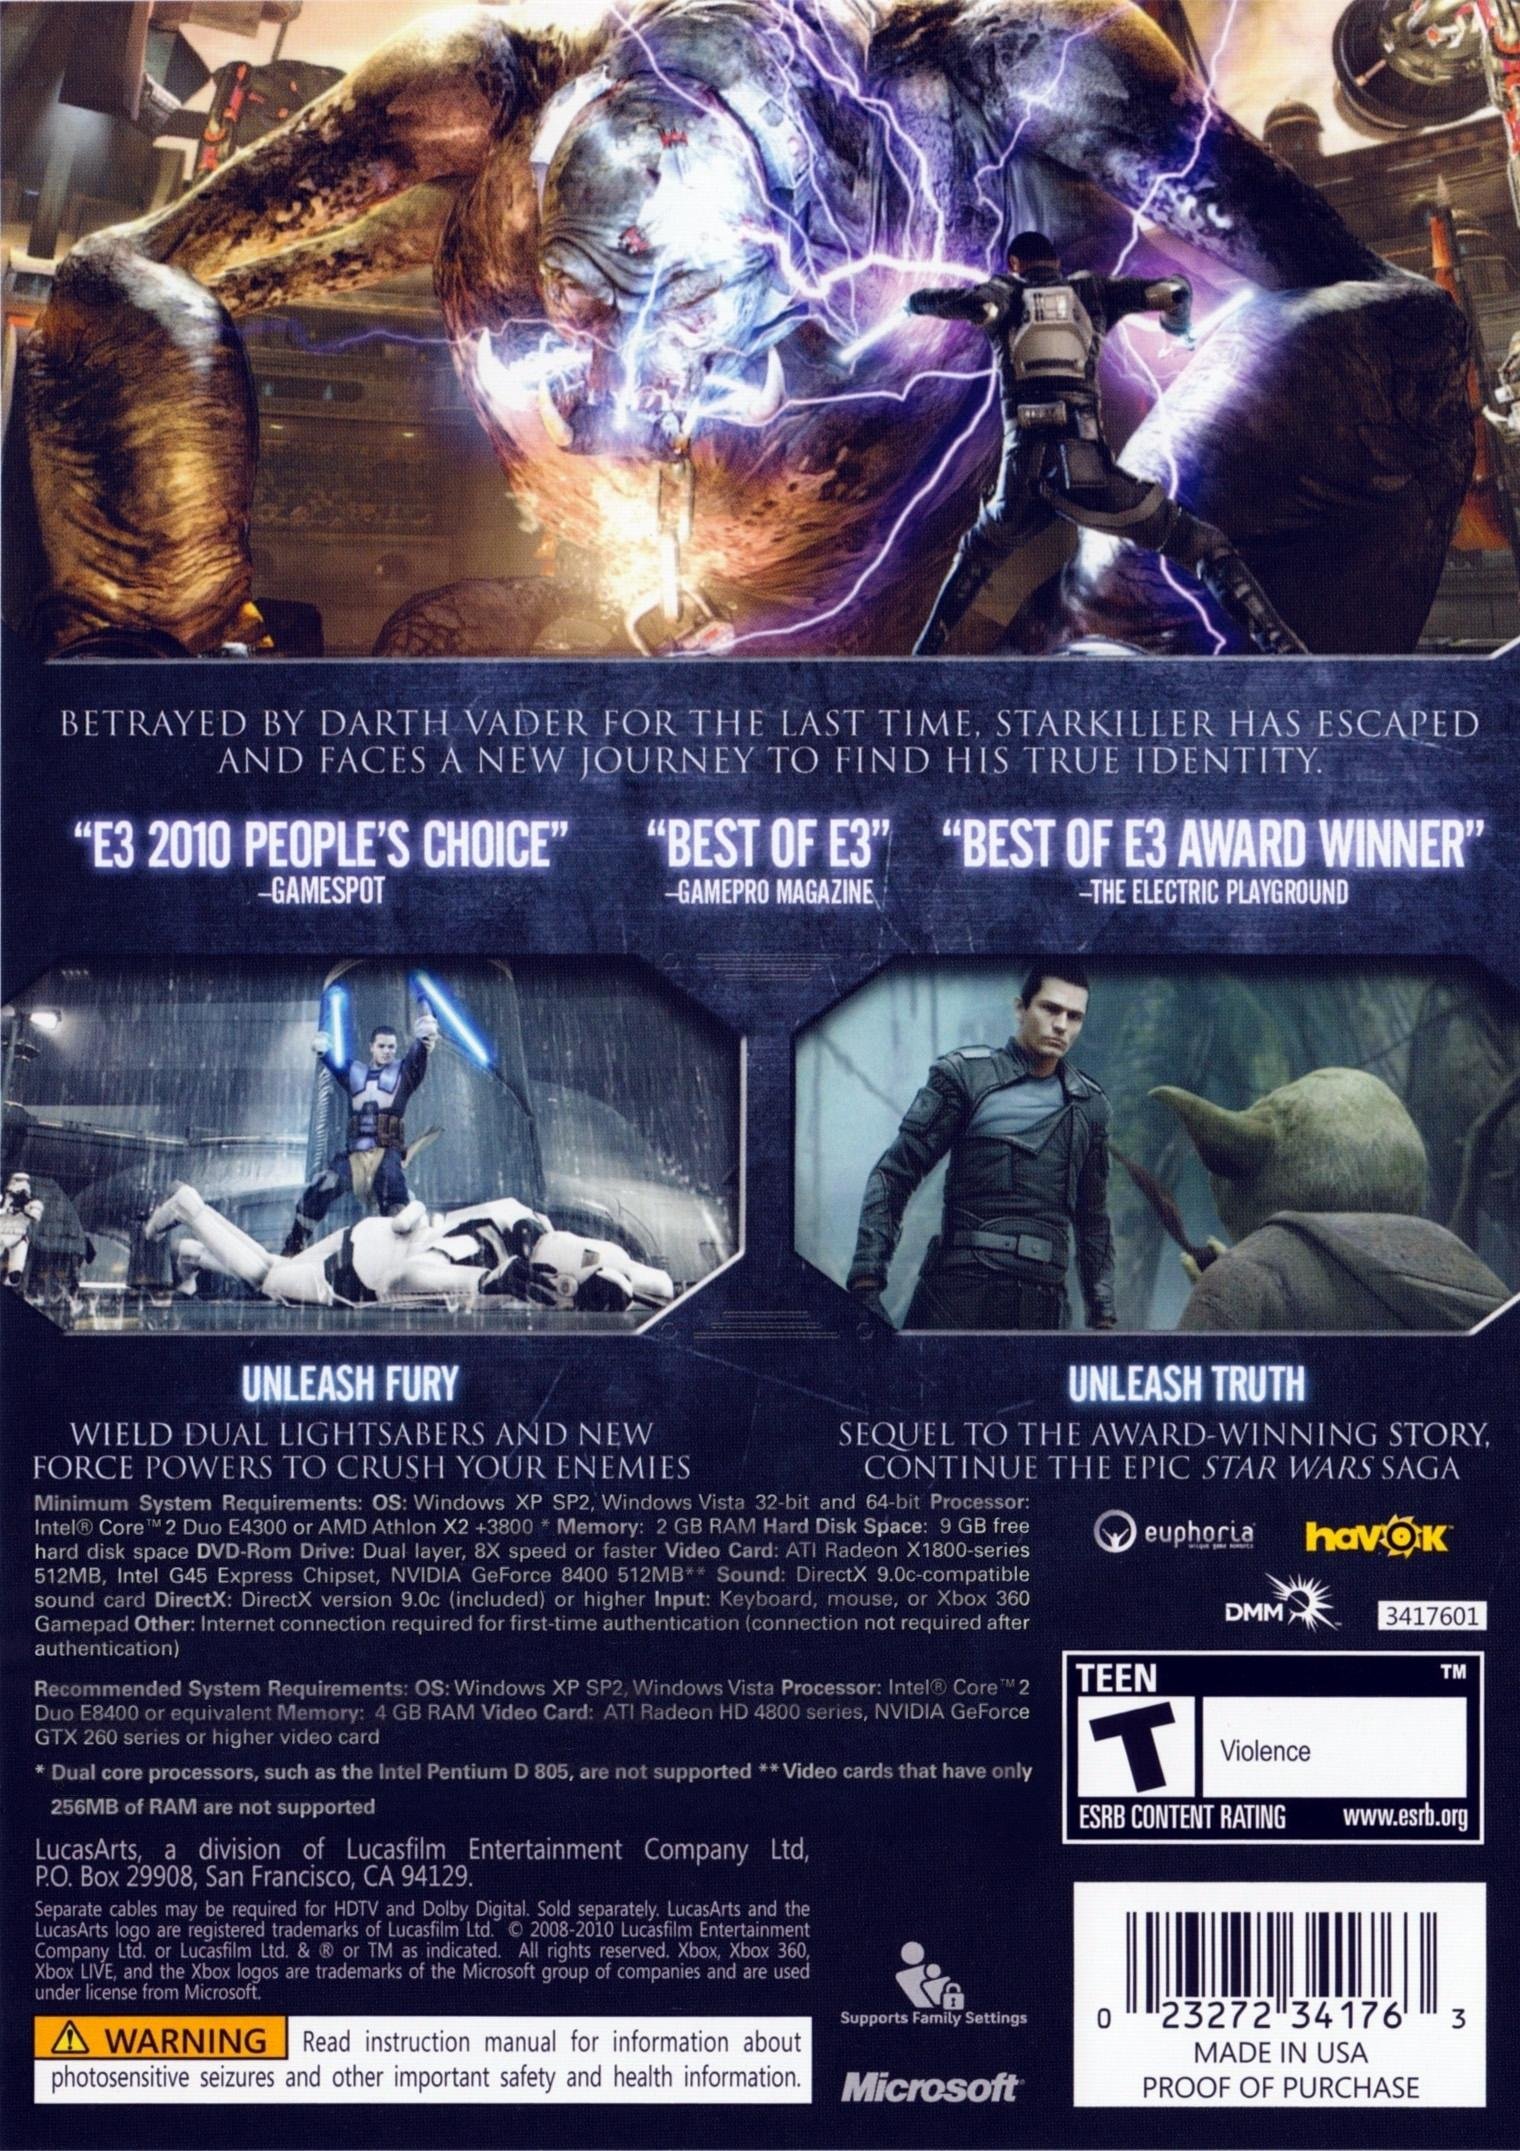 Star Wars the Force unleashed 2. Star Wars the Force unleashed системные требования. Star Wars the Force unleashed обложка. Star Wars the Force unleashed 2 обложка. Коды star wars the force unleashed 2